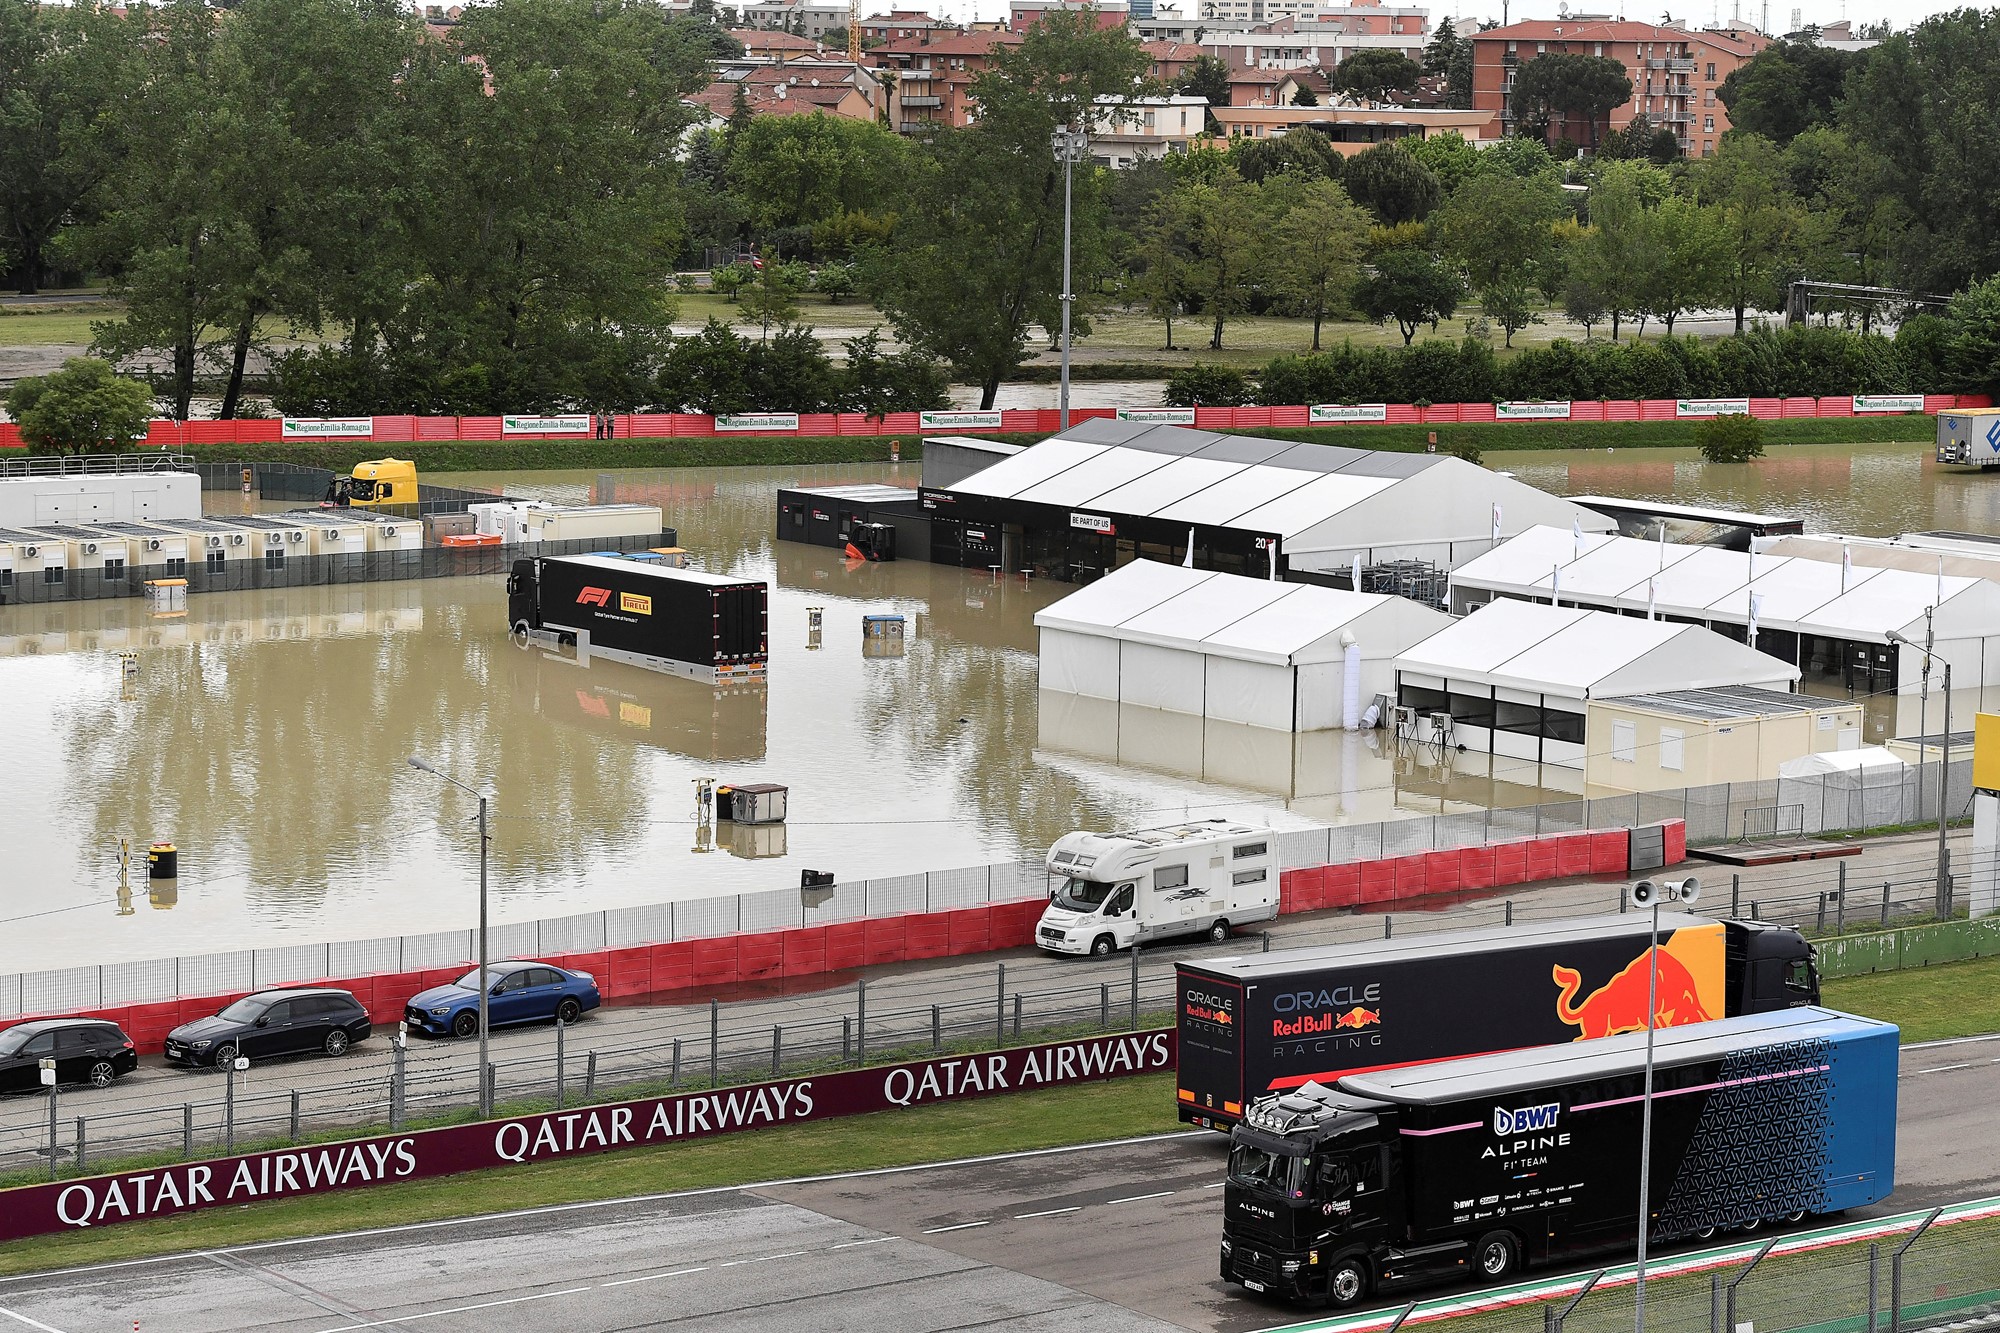 A flooded paddock next to a race car track.